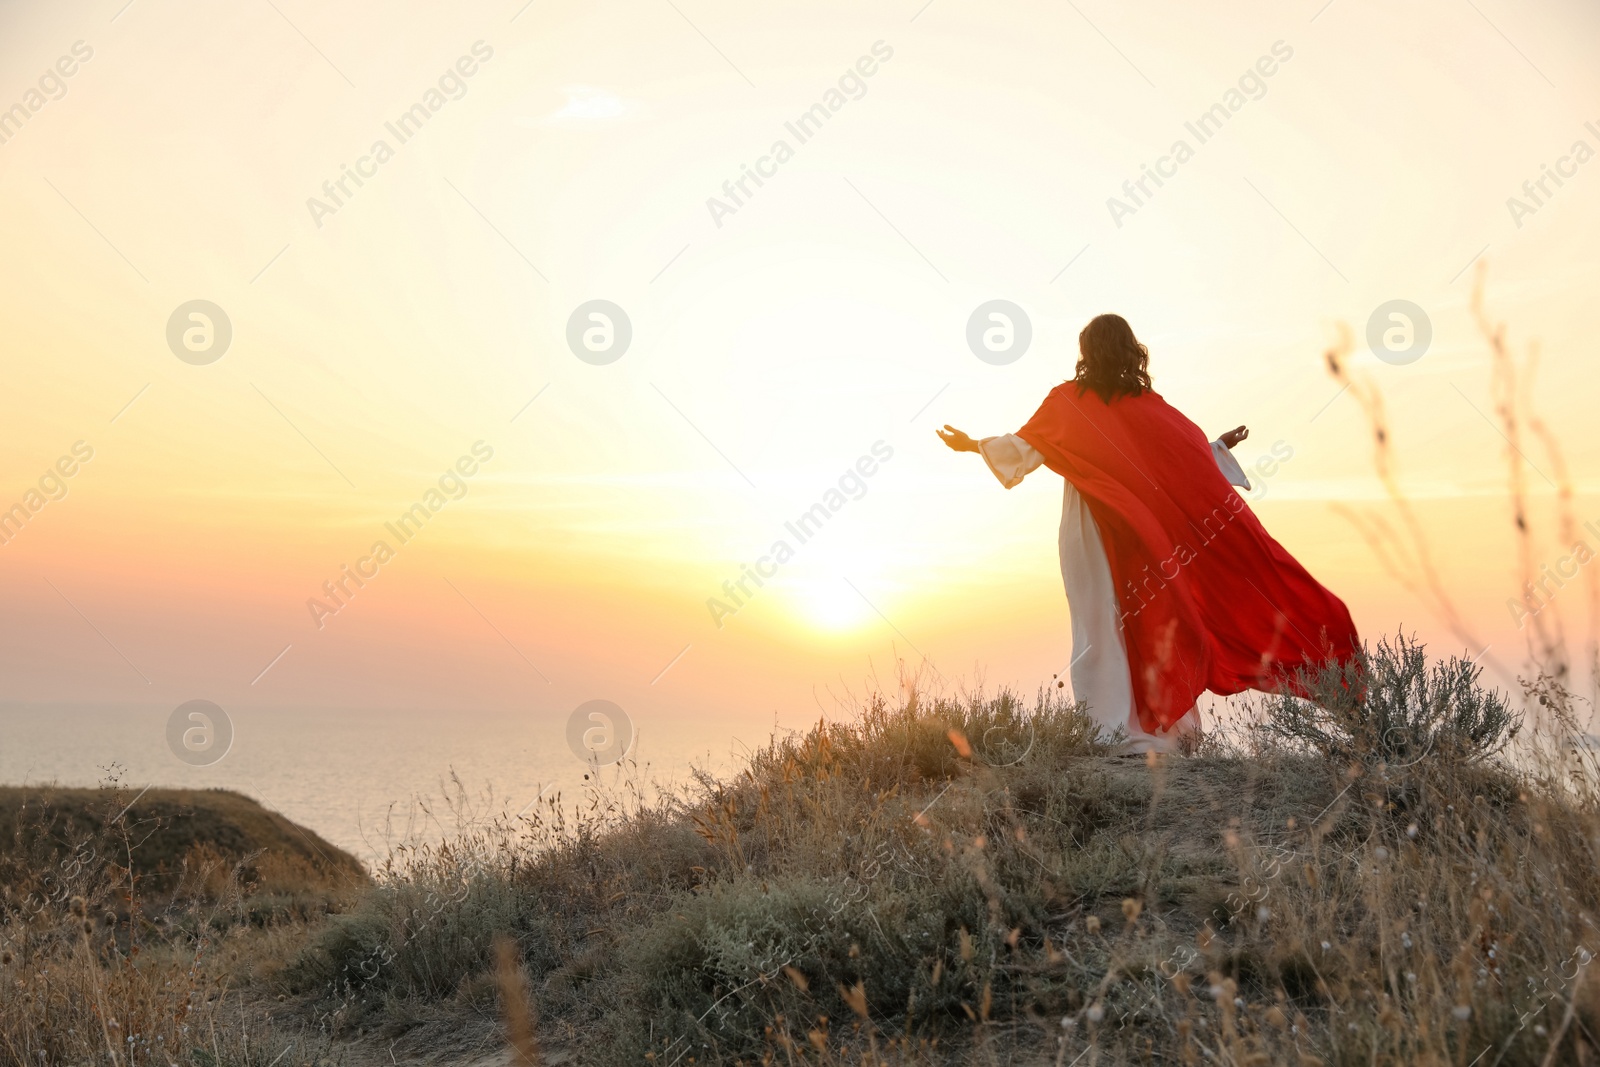 Photo of Jesus Christ raising hands on hills at sunset, back view. Space for text